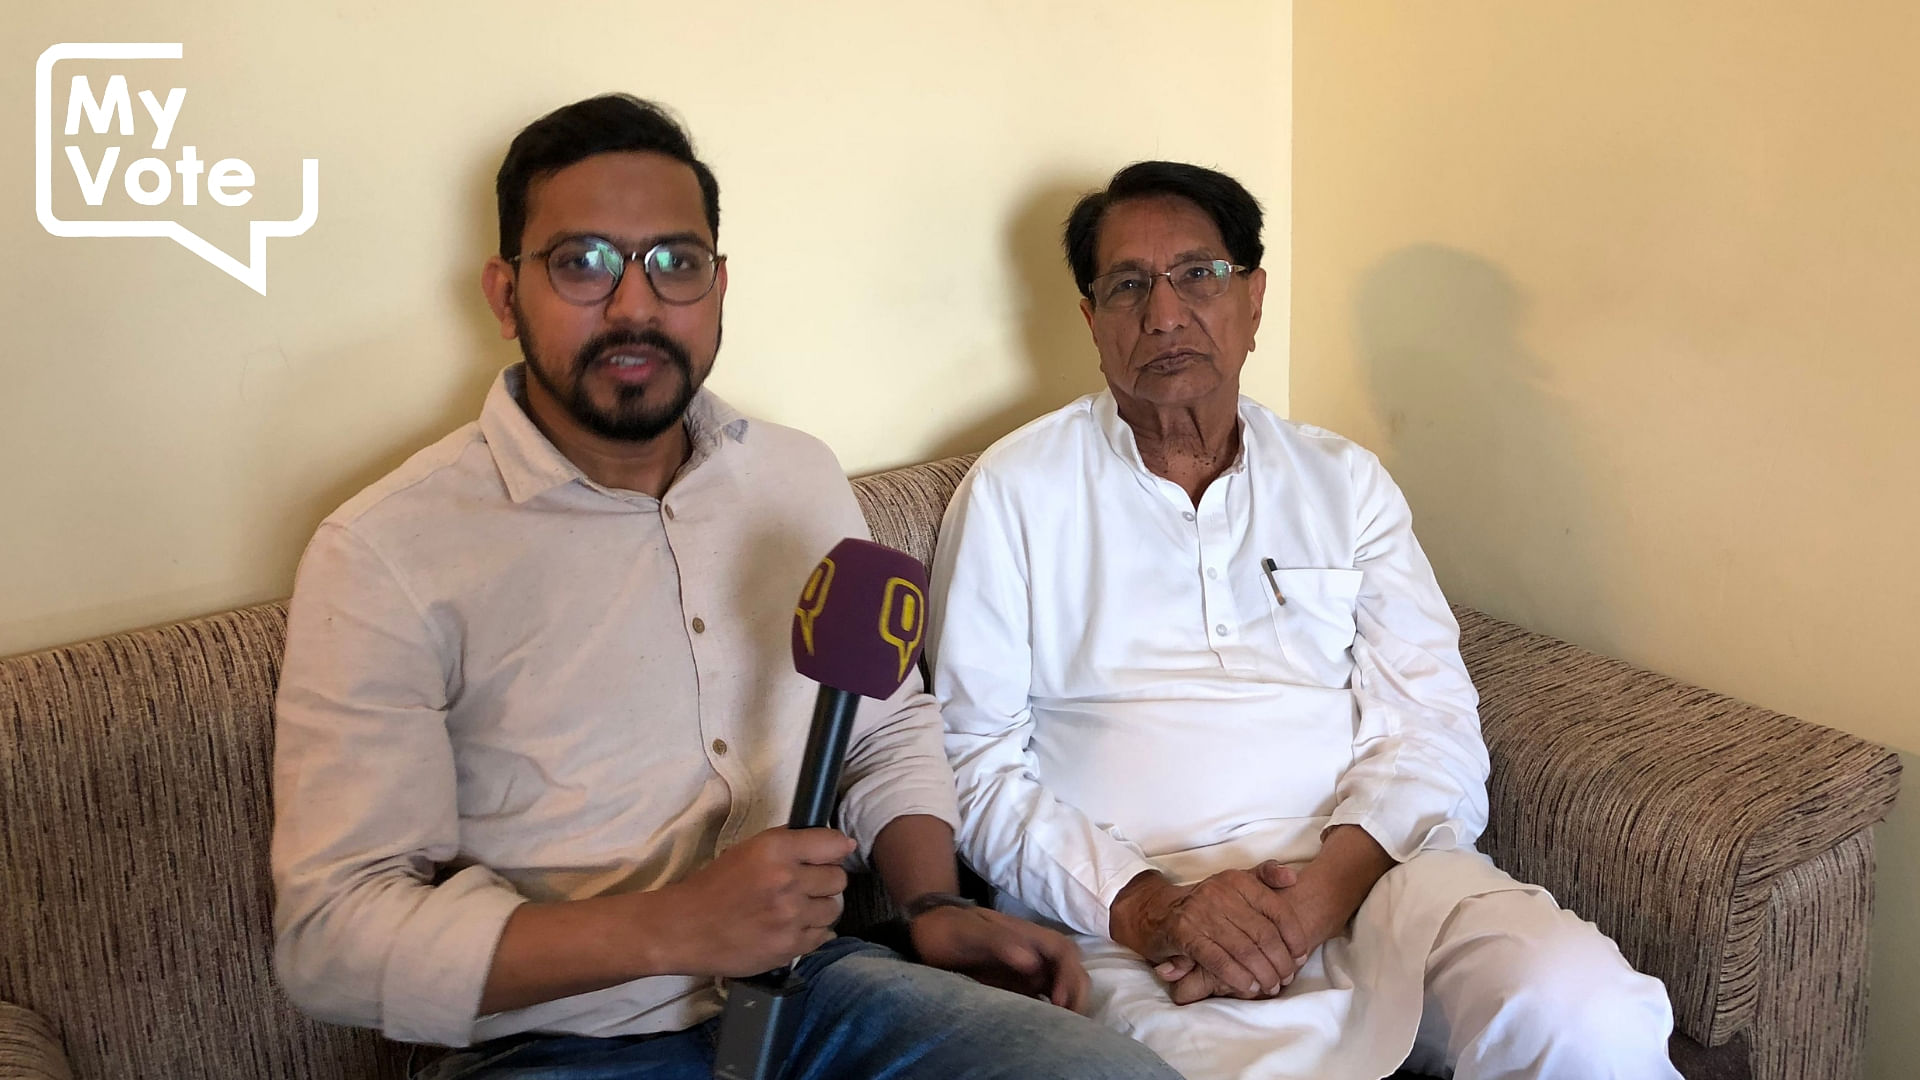 Rashtriya Lok Dal chief and candidate from Muzaffarnagar, Chuadhary Ajit Singh spoke to The Quint on PM Modi’s ‘SHARAB’ comment and said that PM Modi is “a campaigner and can’t rise above it.”